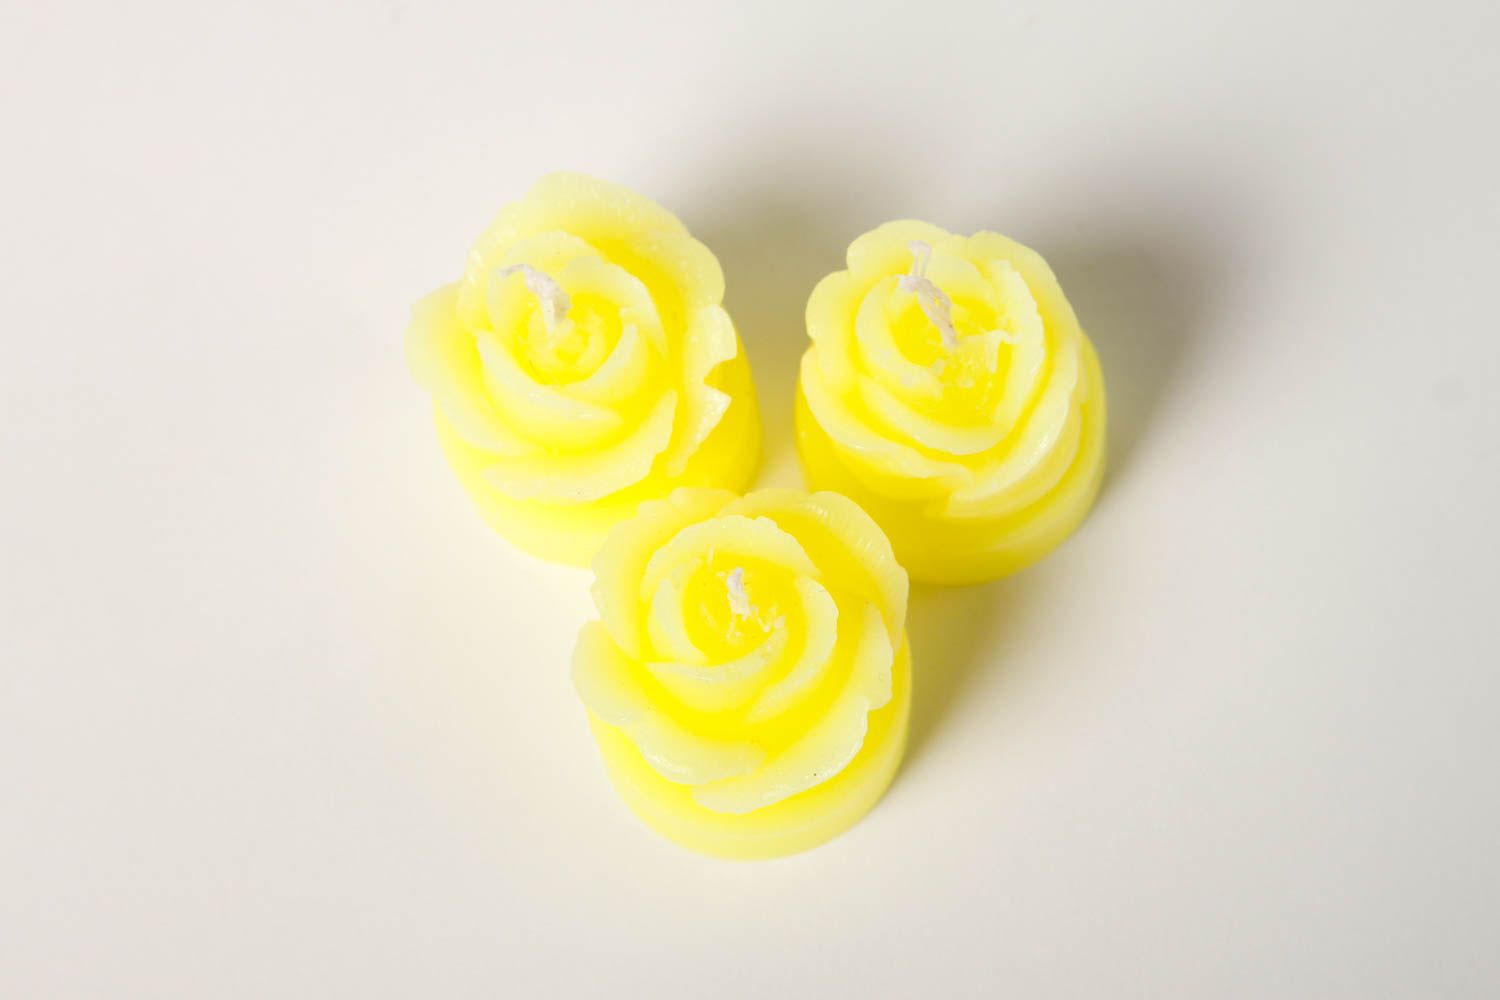 Handmade beautiful candles bright yellow candles 3 cute decor elements photo 4